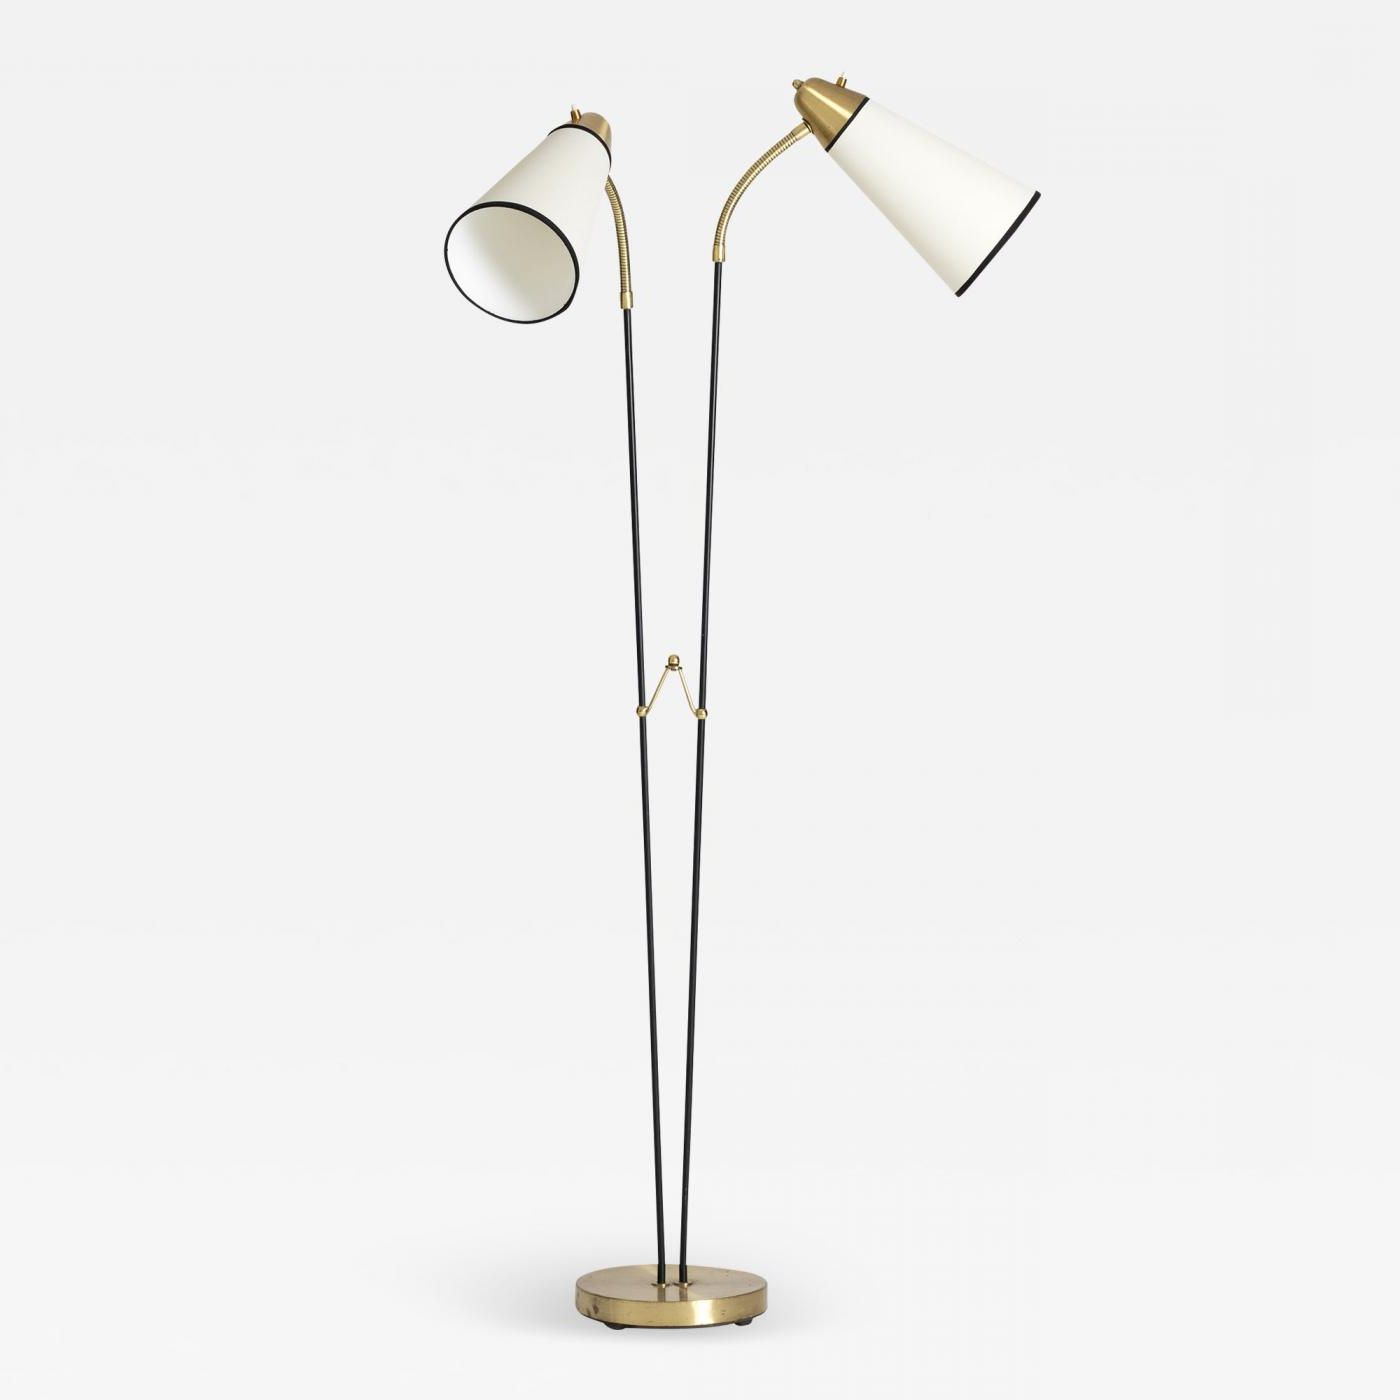 Midcentury Brass And Black Two Arm Floor Lamp In Most Up To Date 2 Arm Standing Lamps (View 1 of 15)